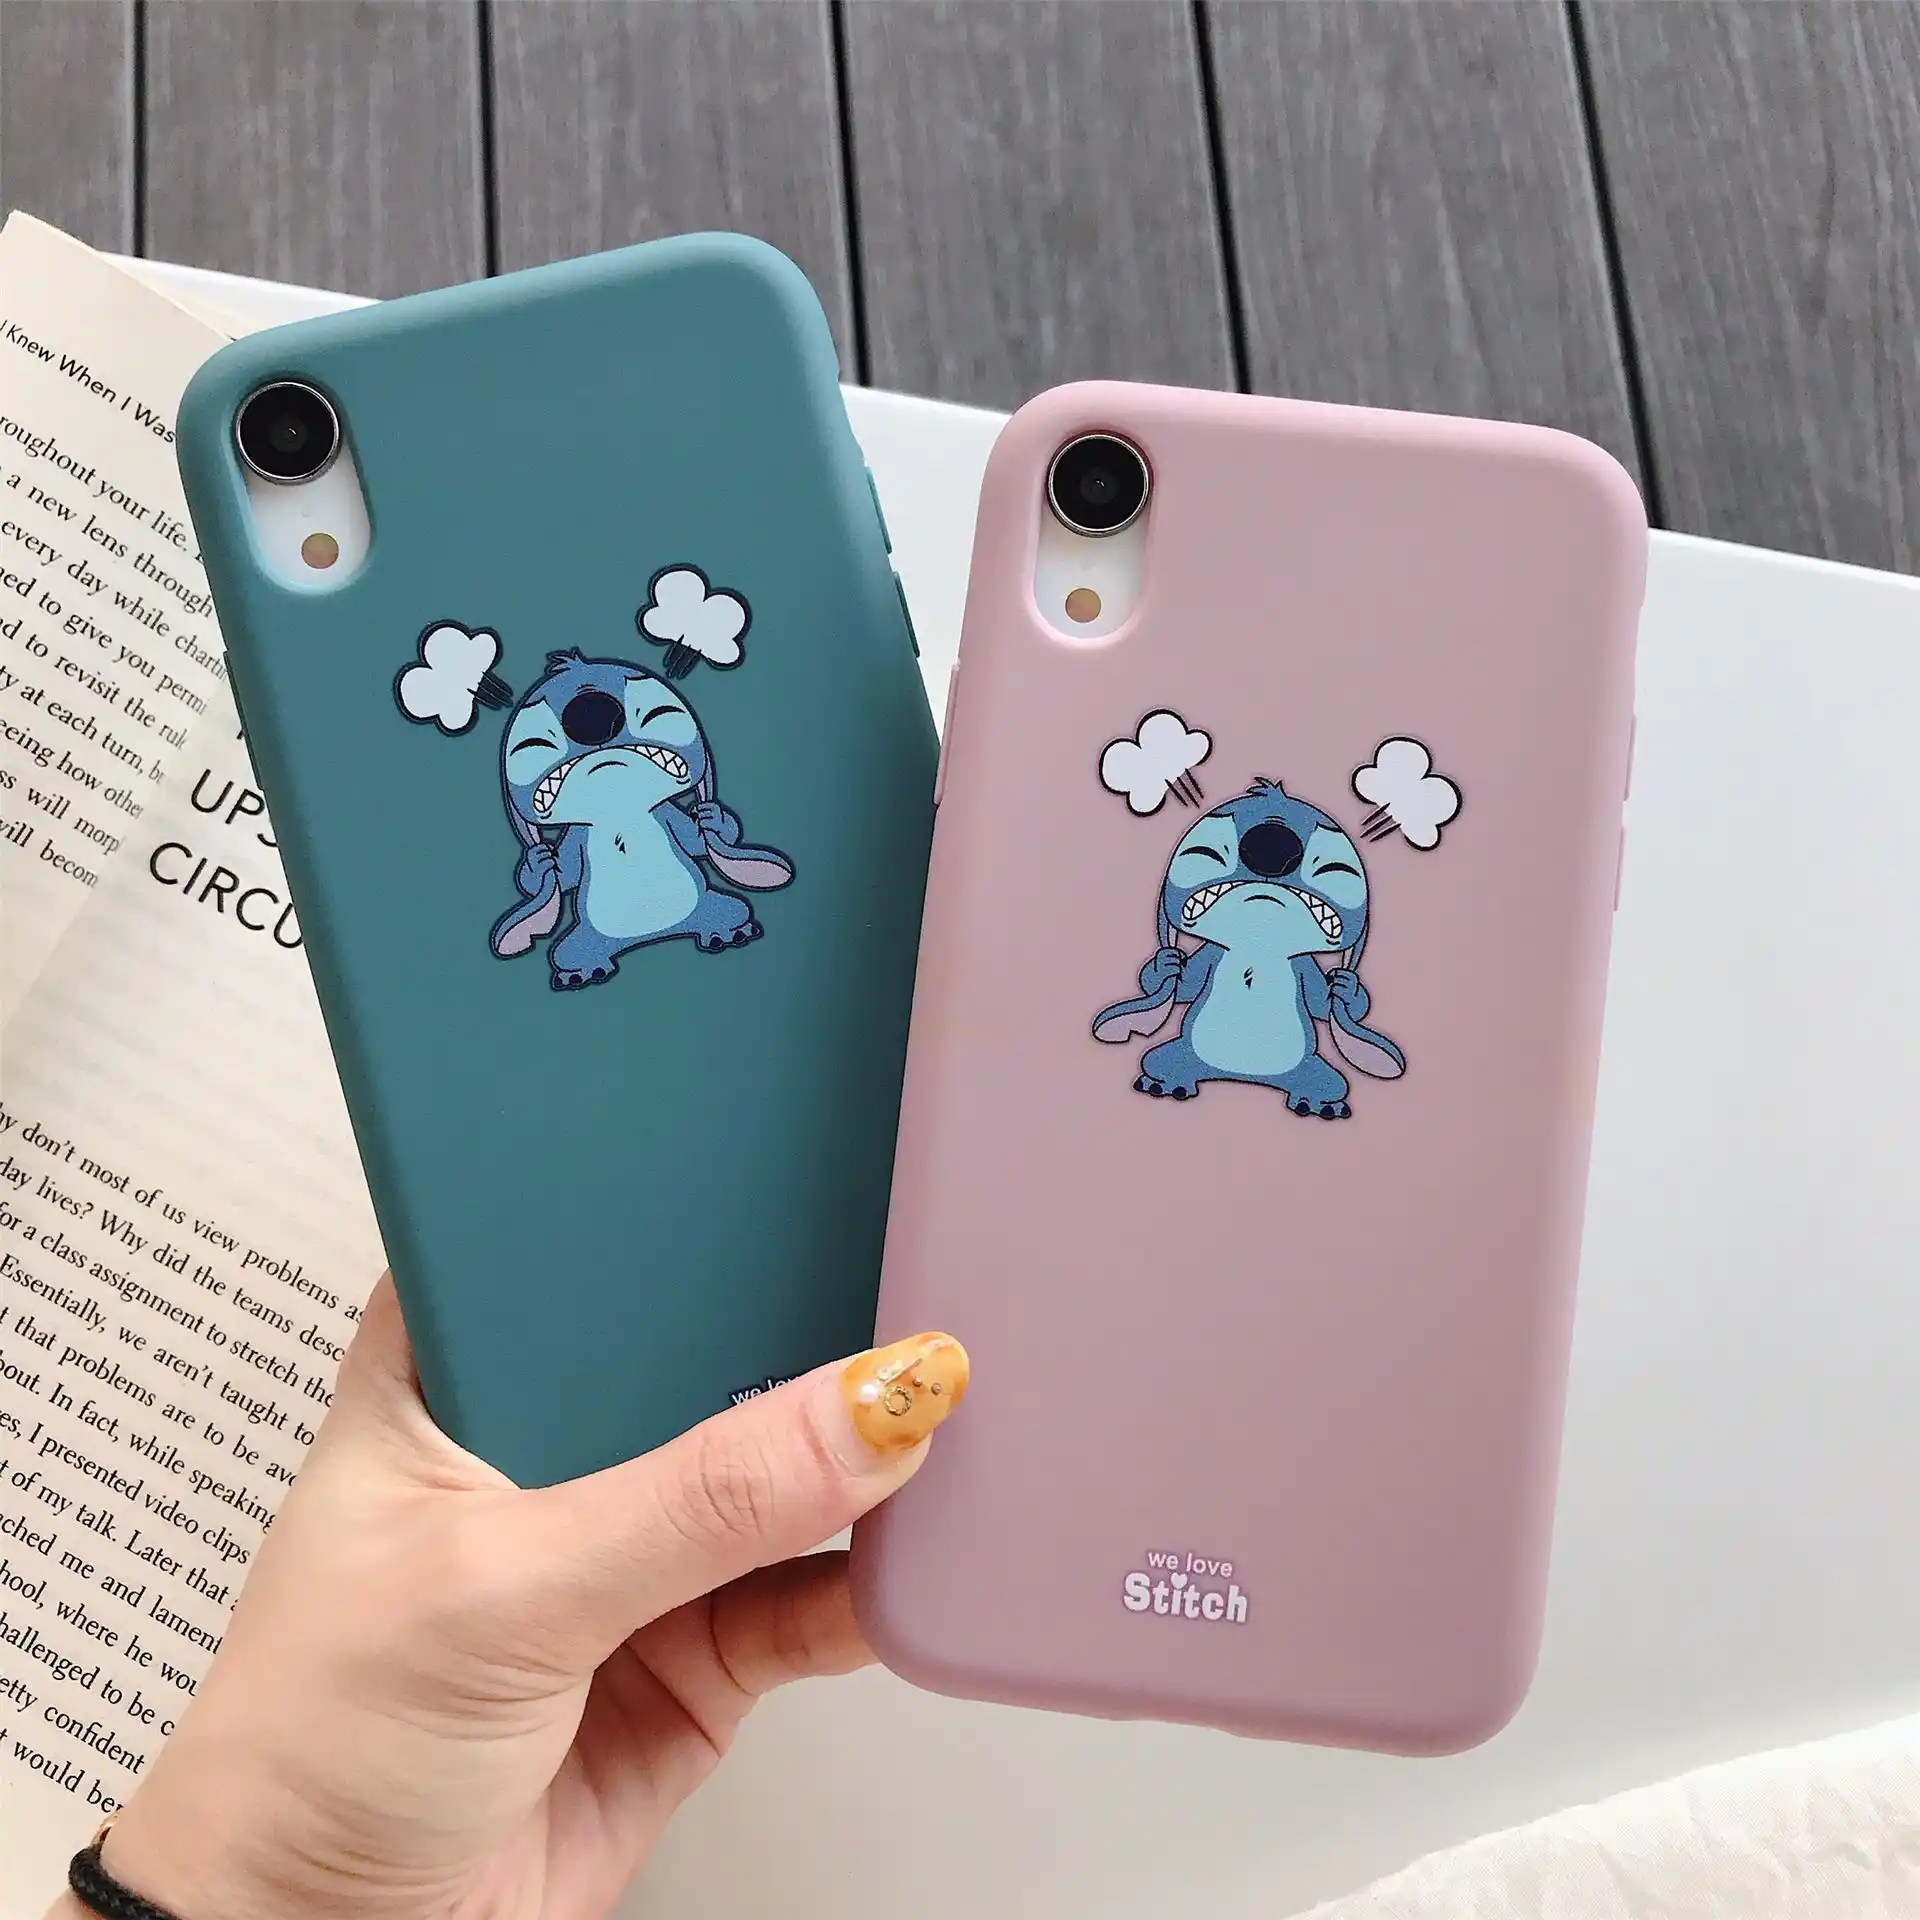 coque iphone 6 turns apple into sheep